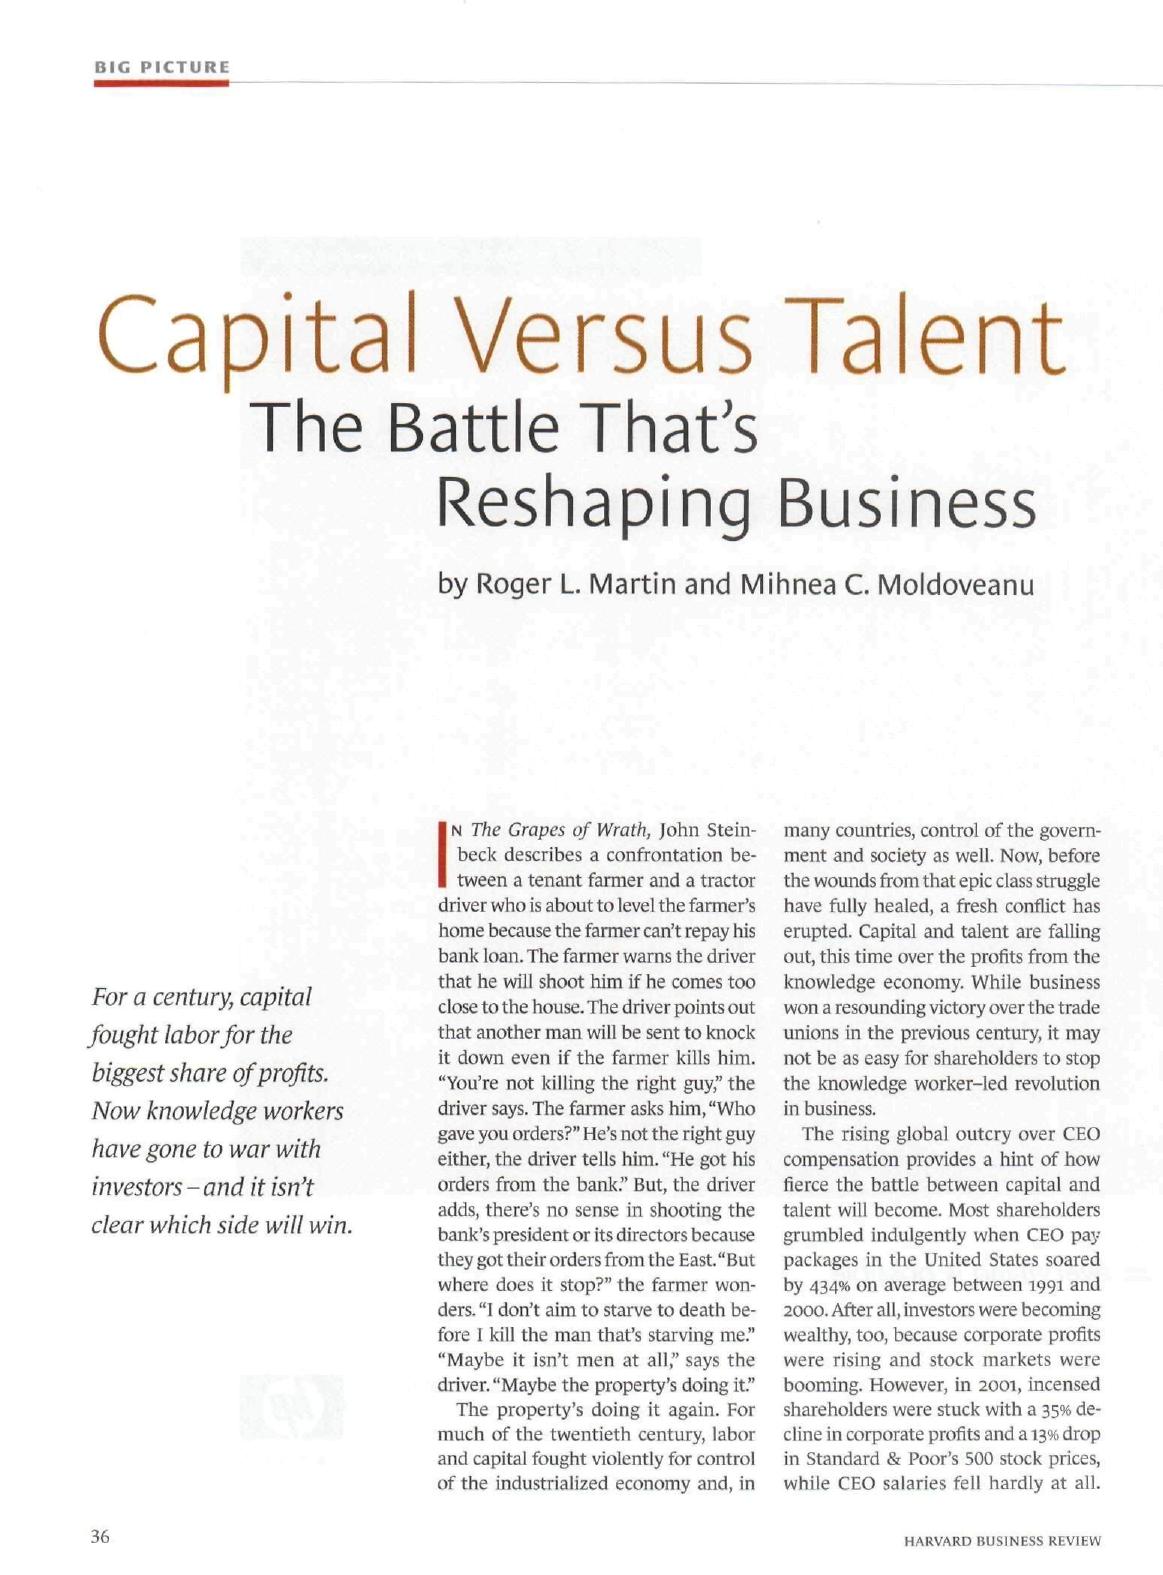 Capital Versus Talent - The Battle That's Reshaping Business (Article)